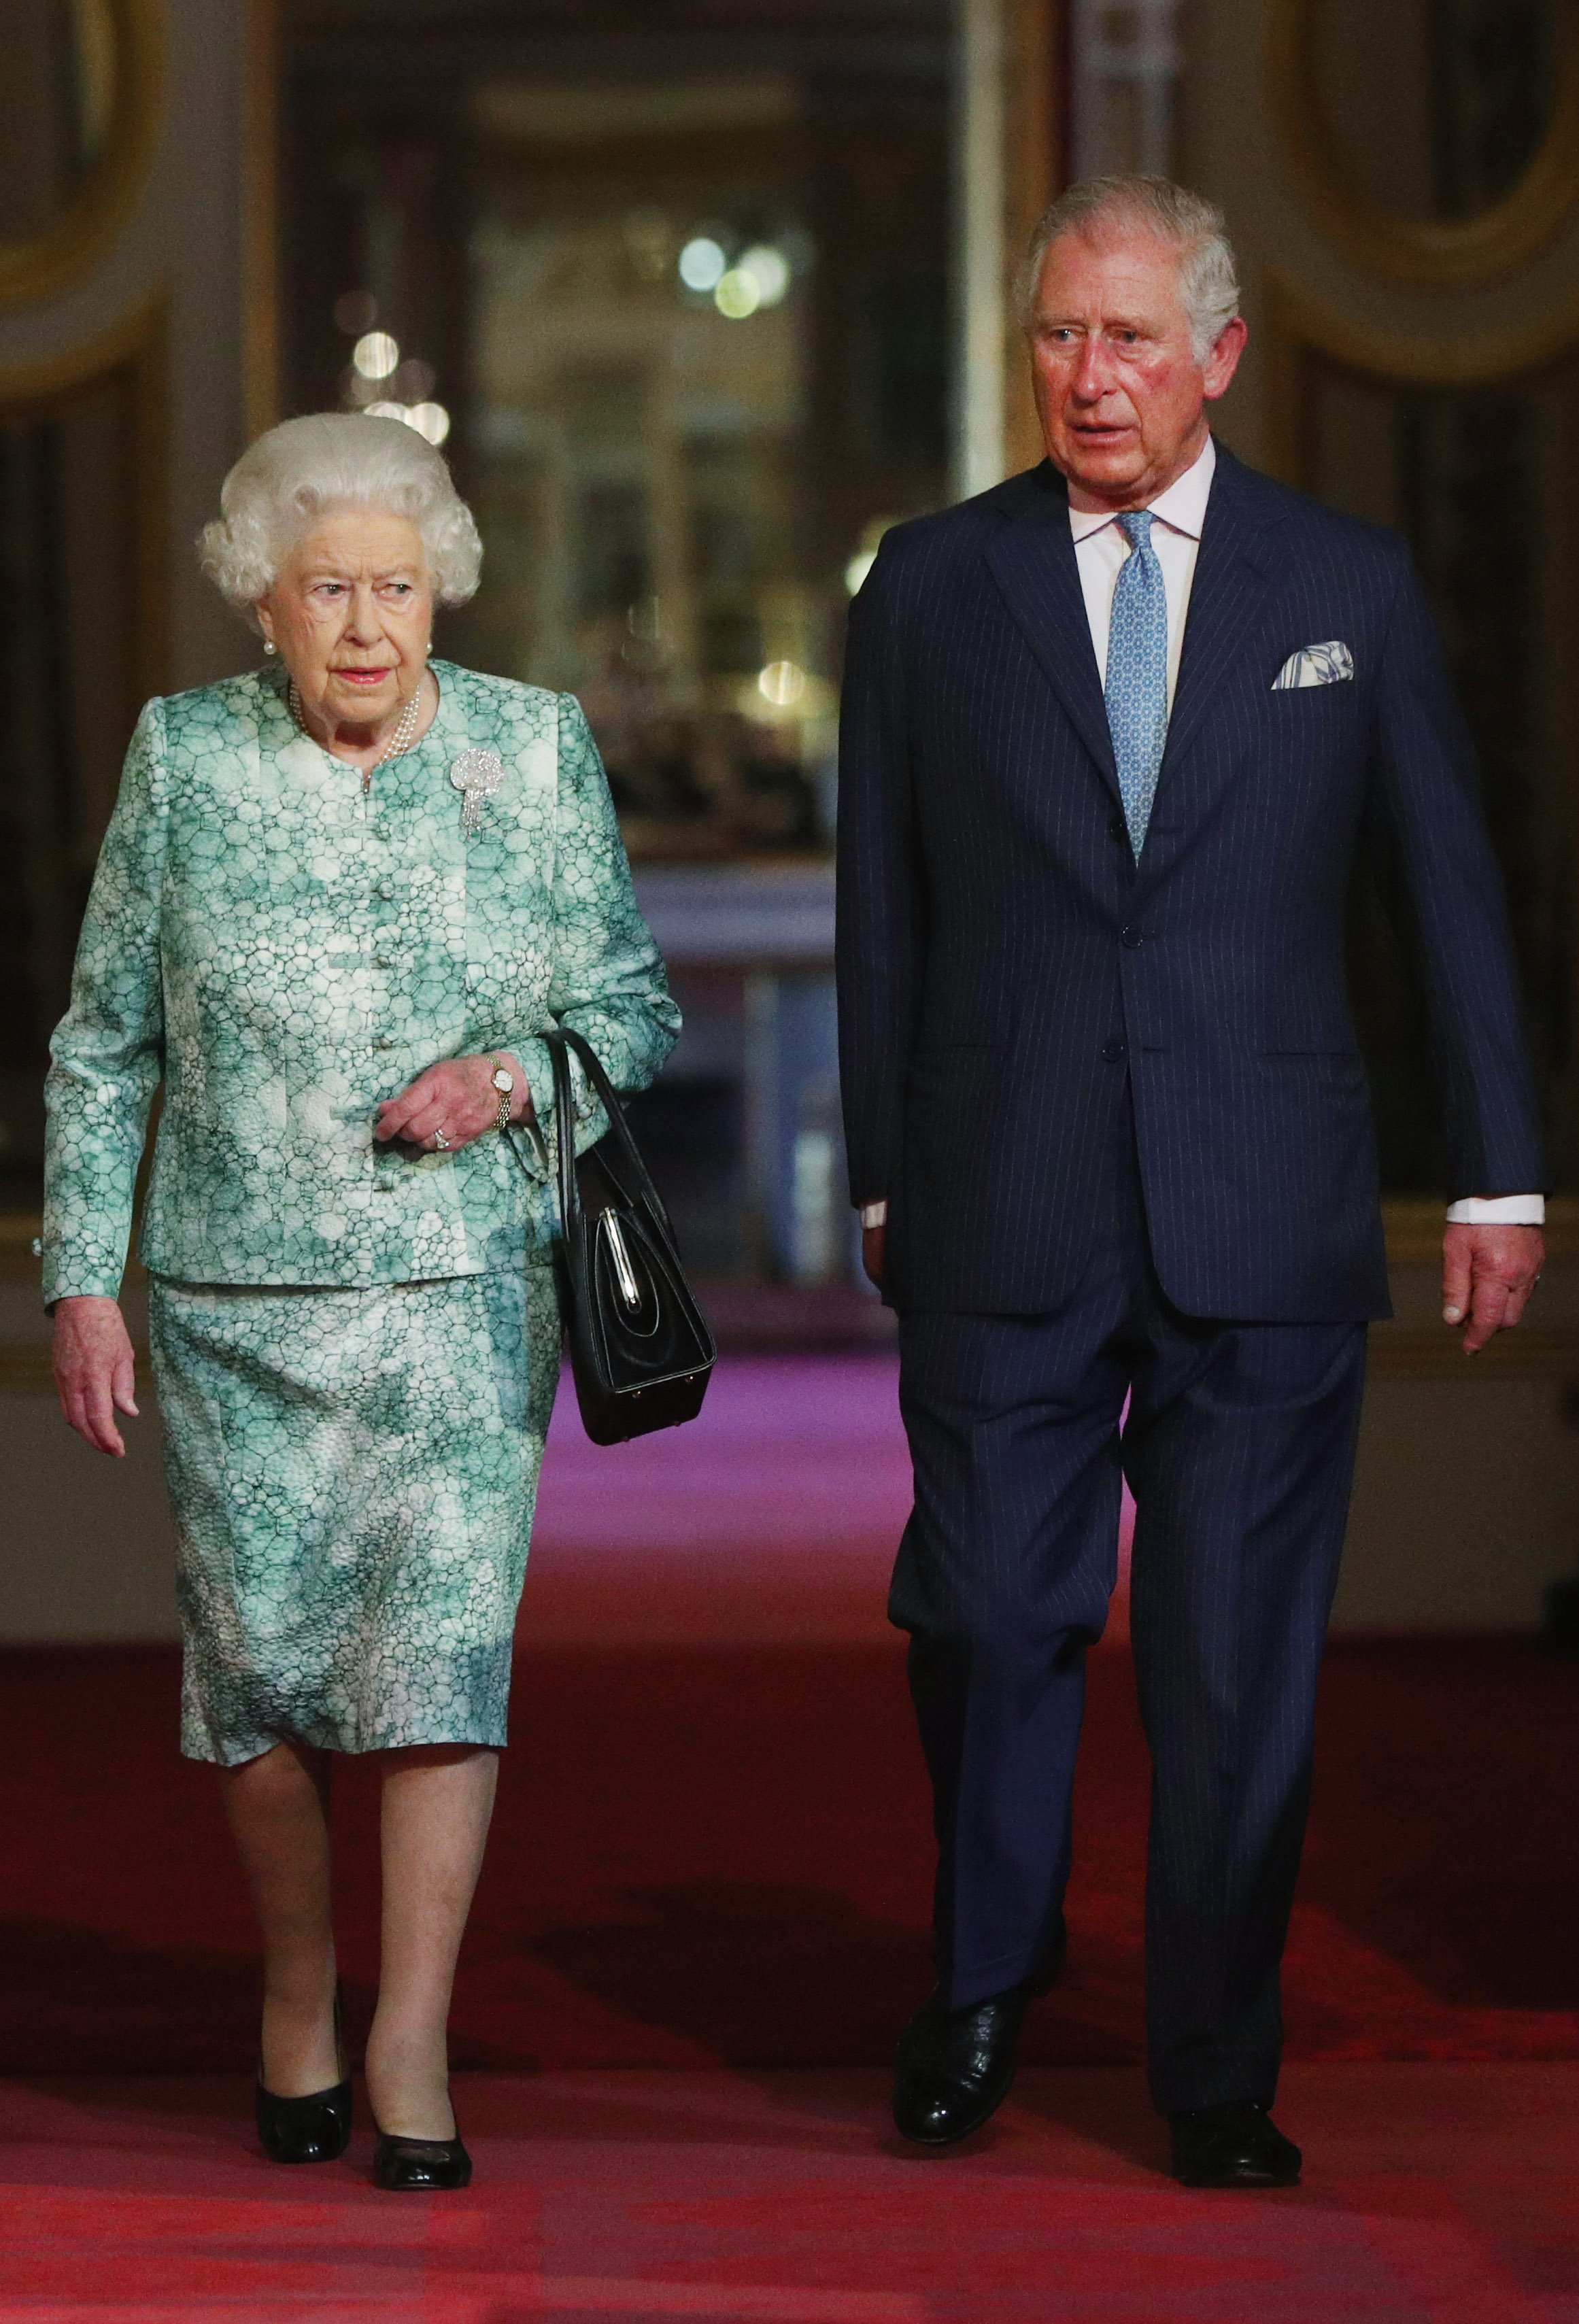 Queen Elizabeth II and Prince Charles, Prince of Wales attend the formal opening of the Commonwealth Heads of Government Meeting on April 19, 2018, in London, England. | Source: Getty Images.